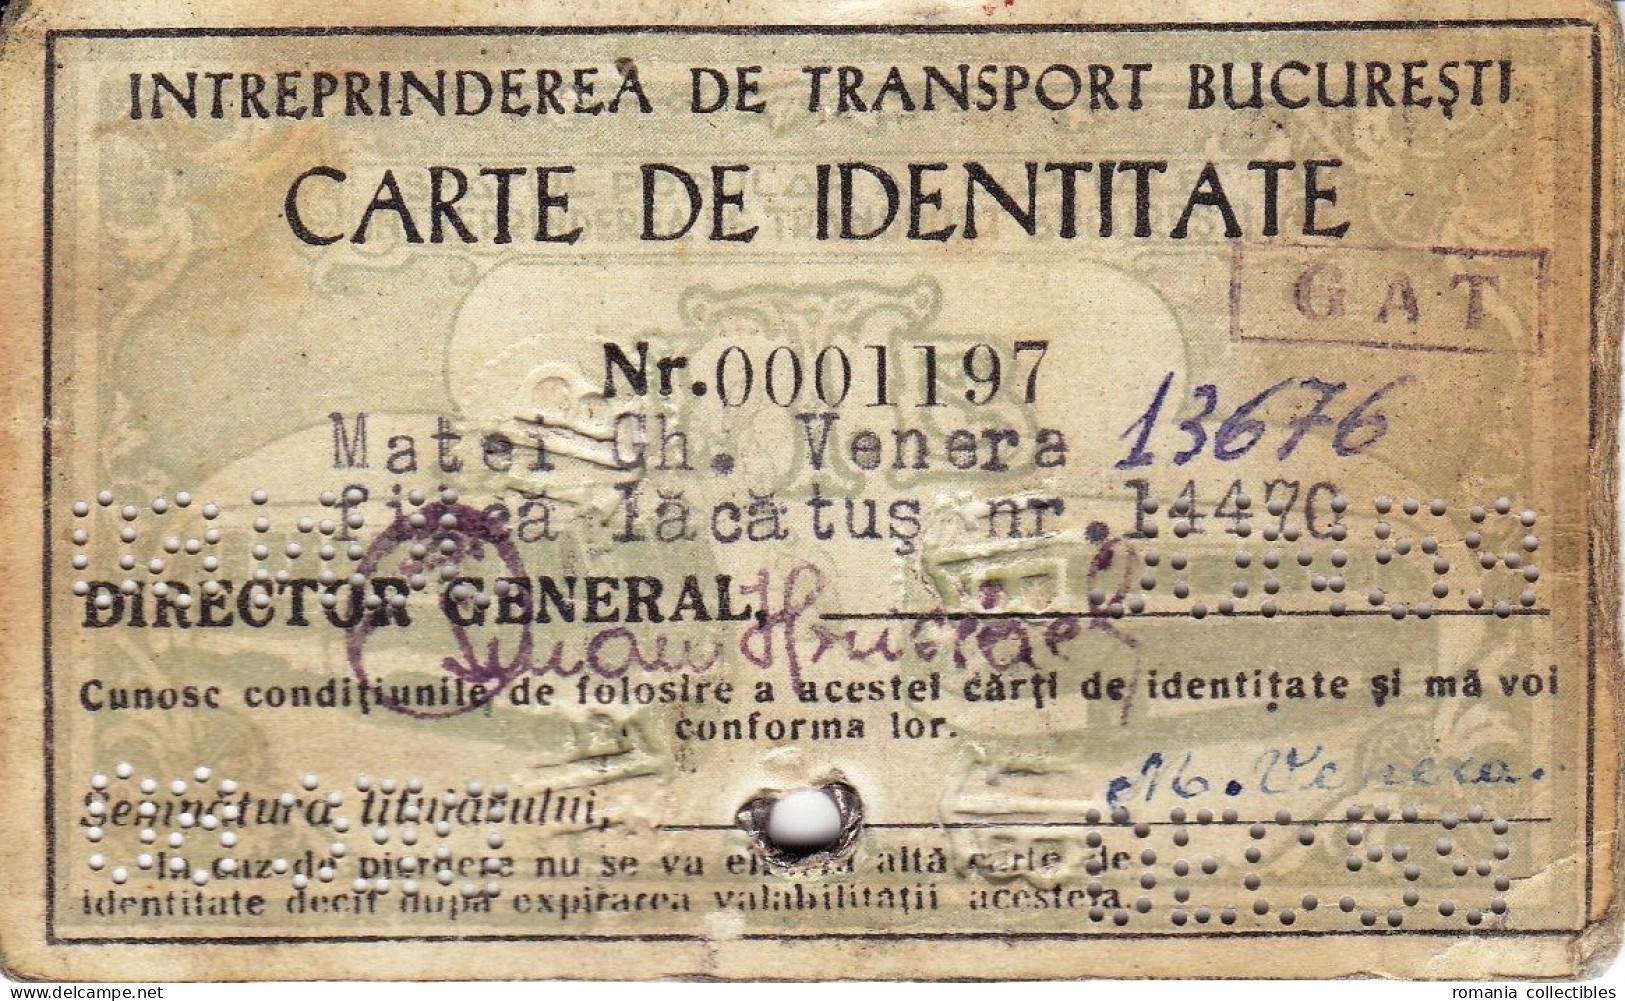 Romania, 1959, Bucharest Tramway - Vintage Transport Pass, ITB - Other & Unclassified